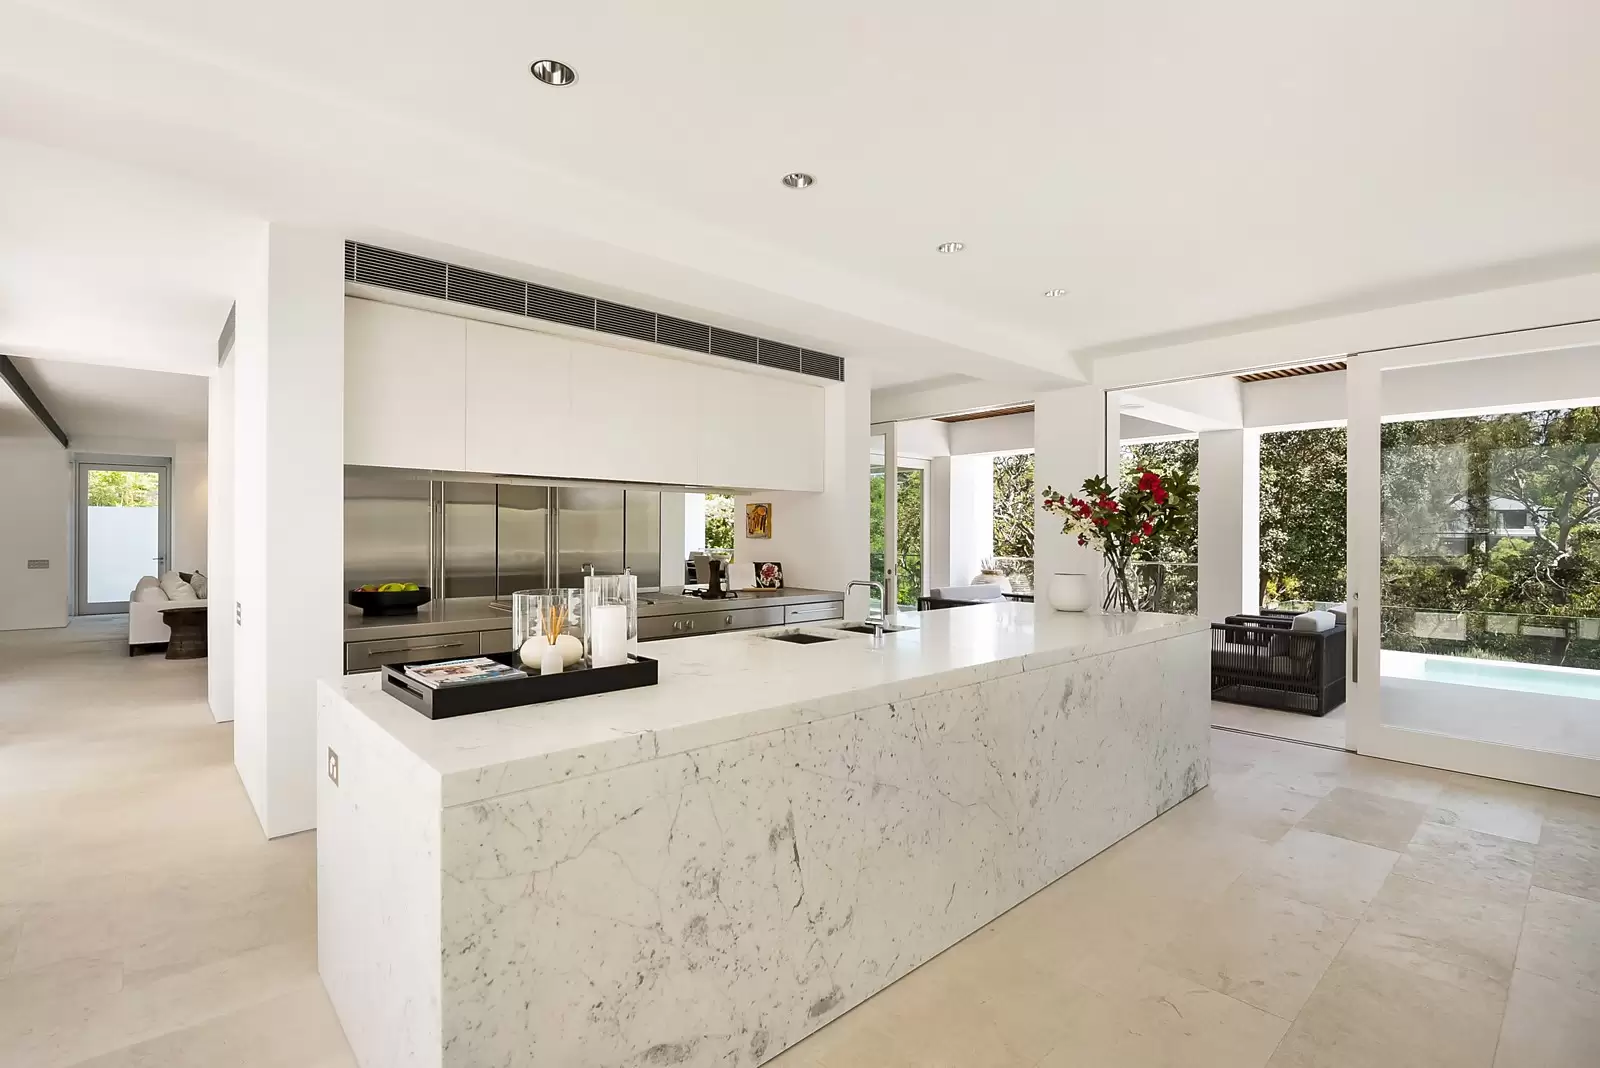 Photo #14: 10 The Crescent, Vaucluse - Sold by Sydney Sotheby's International Realty